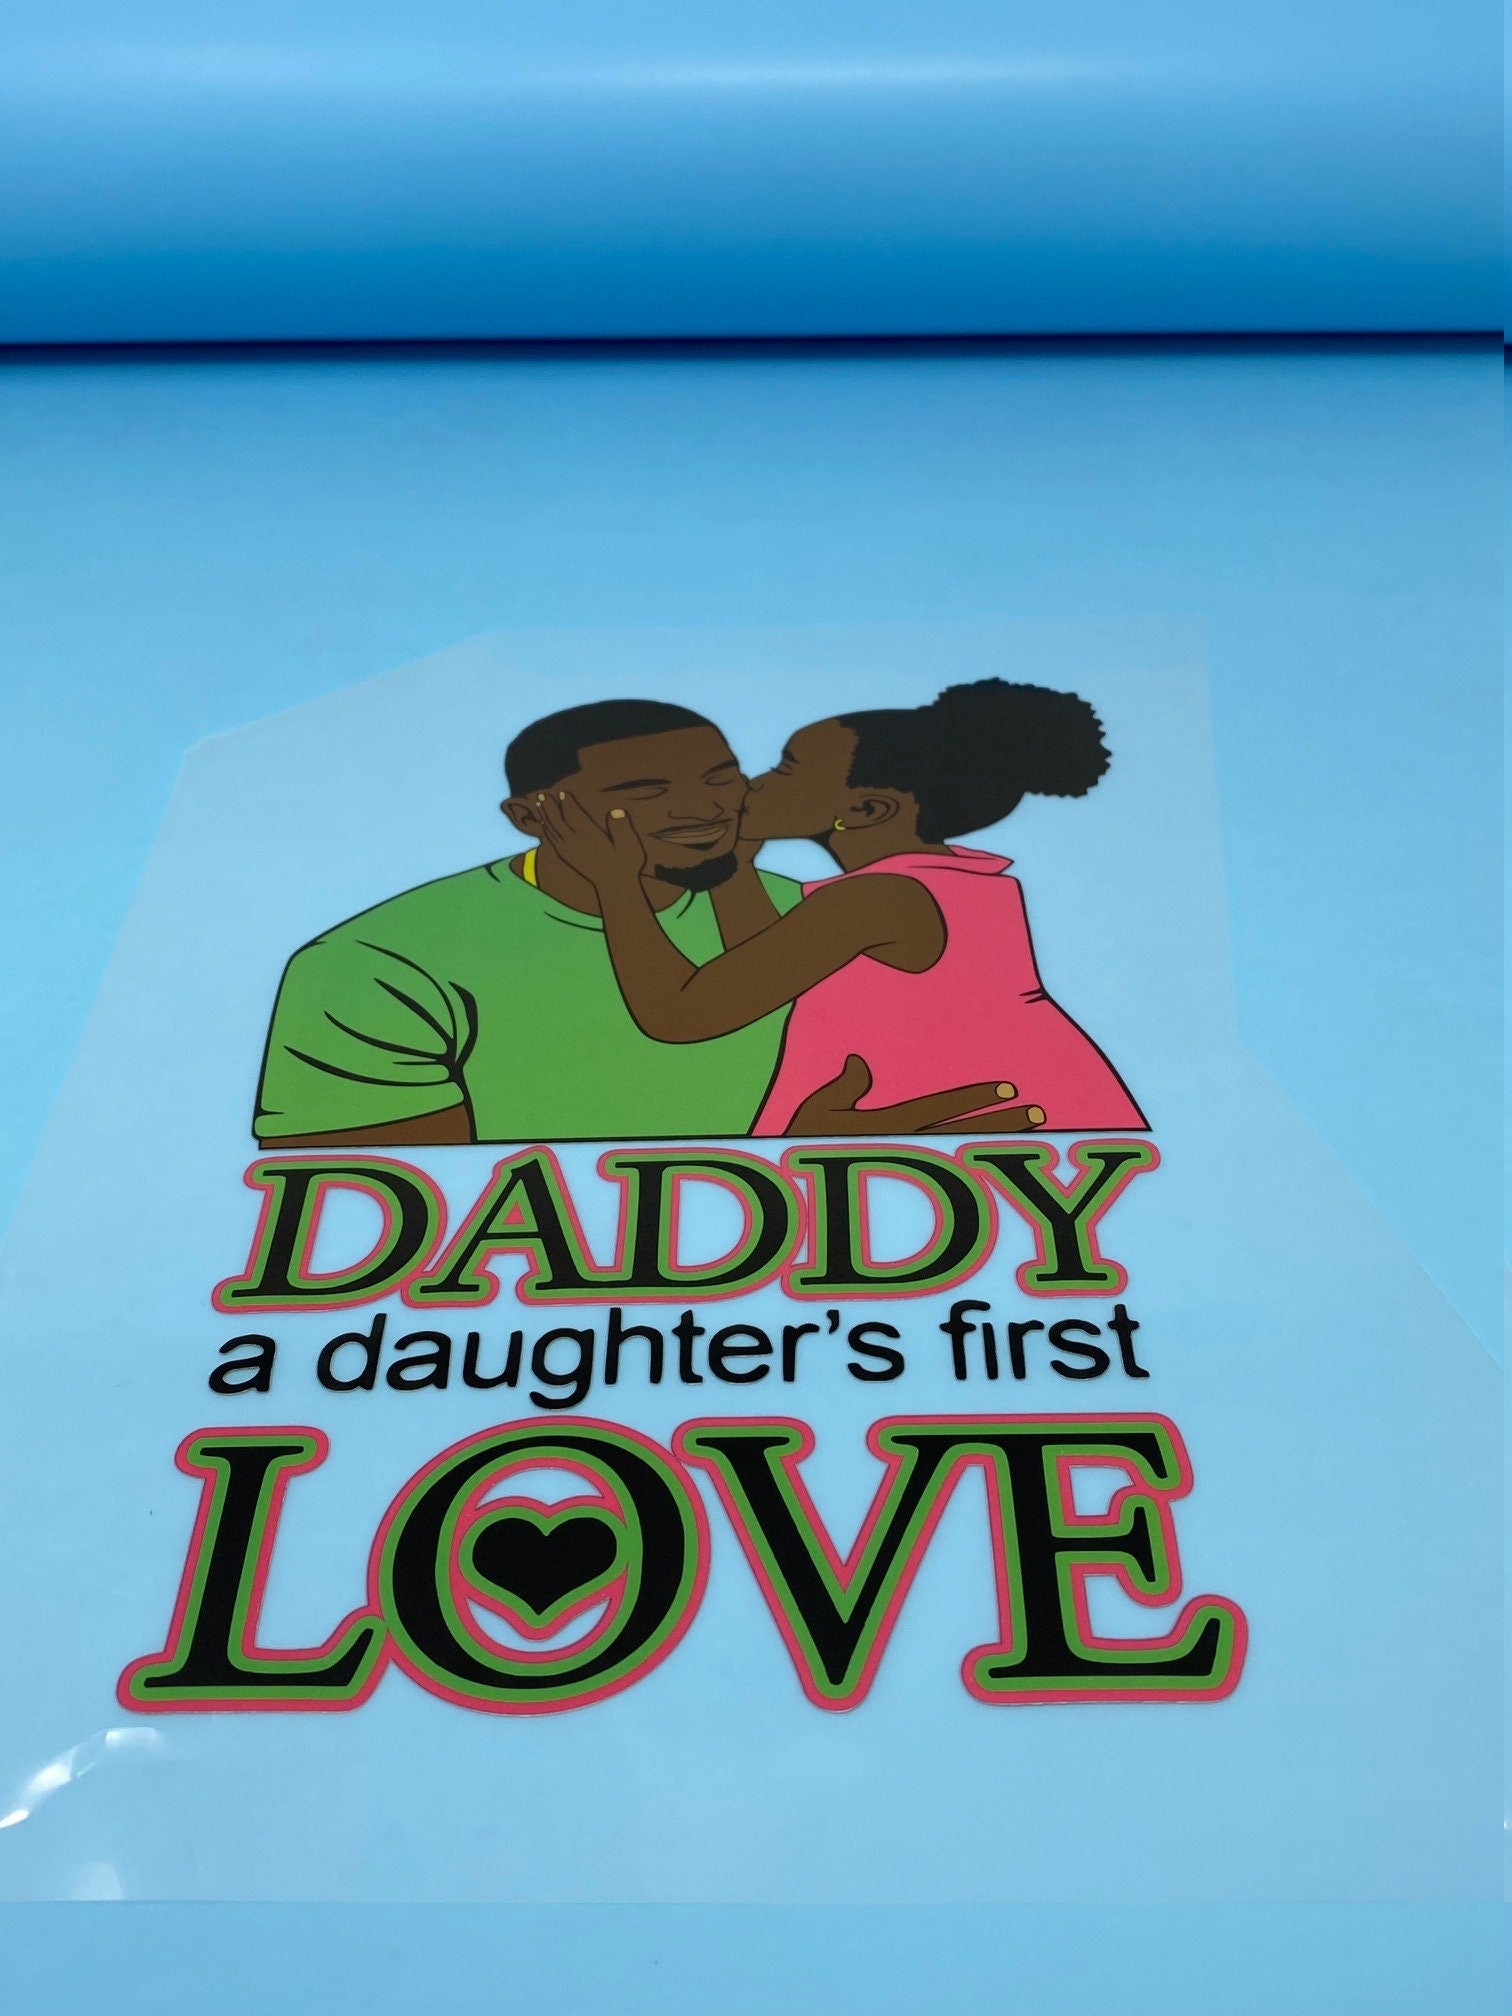 T-shirt Transfer Sheet, "Daddy, A Daughters First Love"  for HEAT PRESSING on garments,T-Shirts, Sweaters, Htv Appliques, Etc.